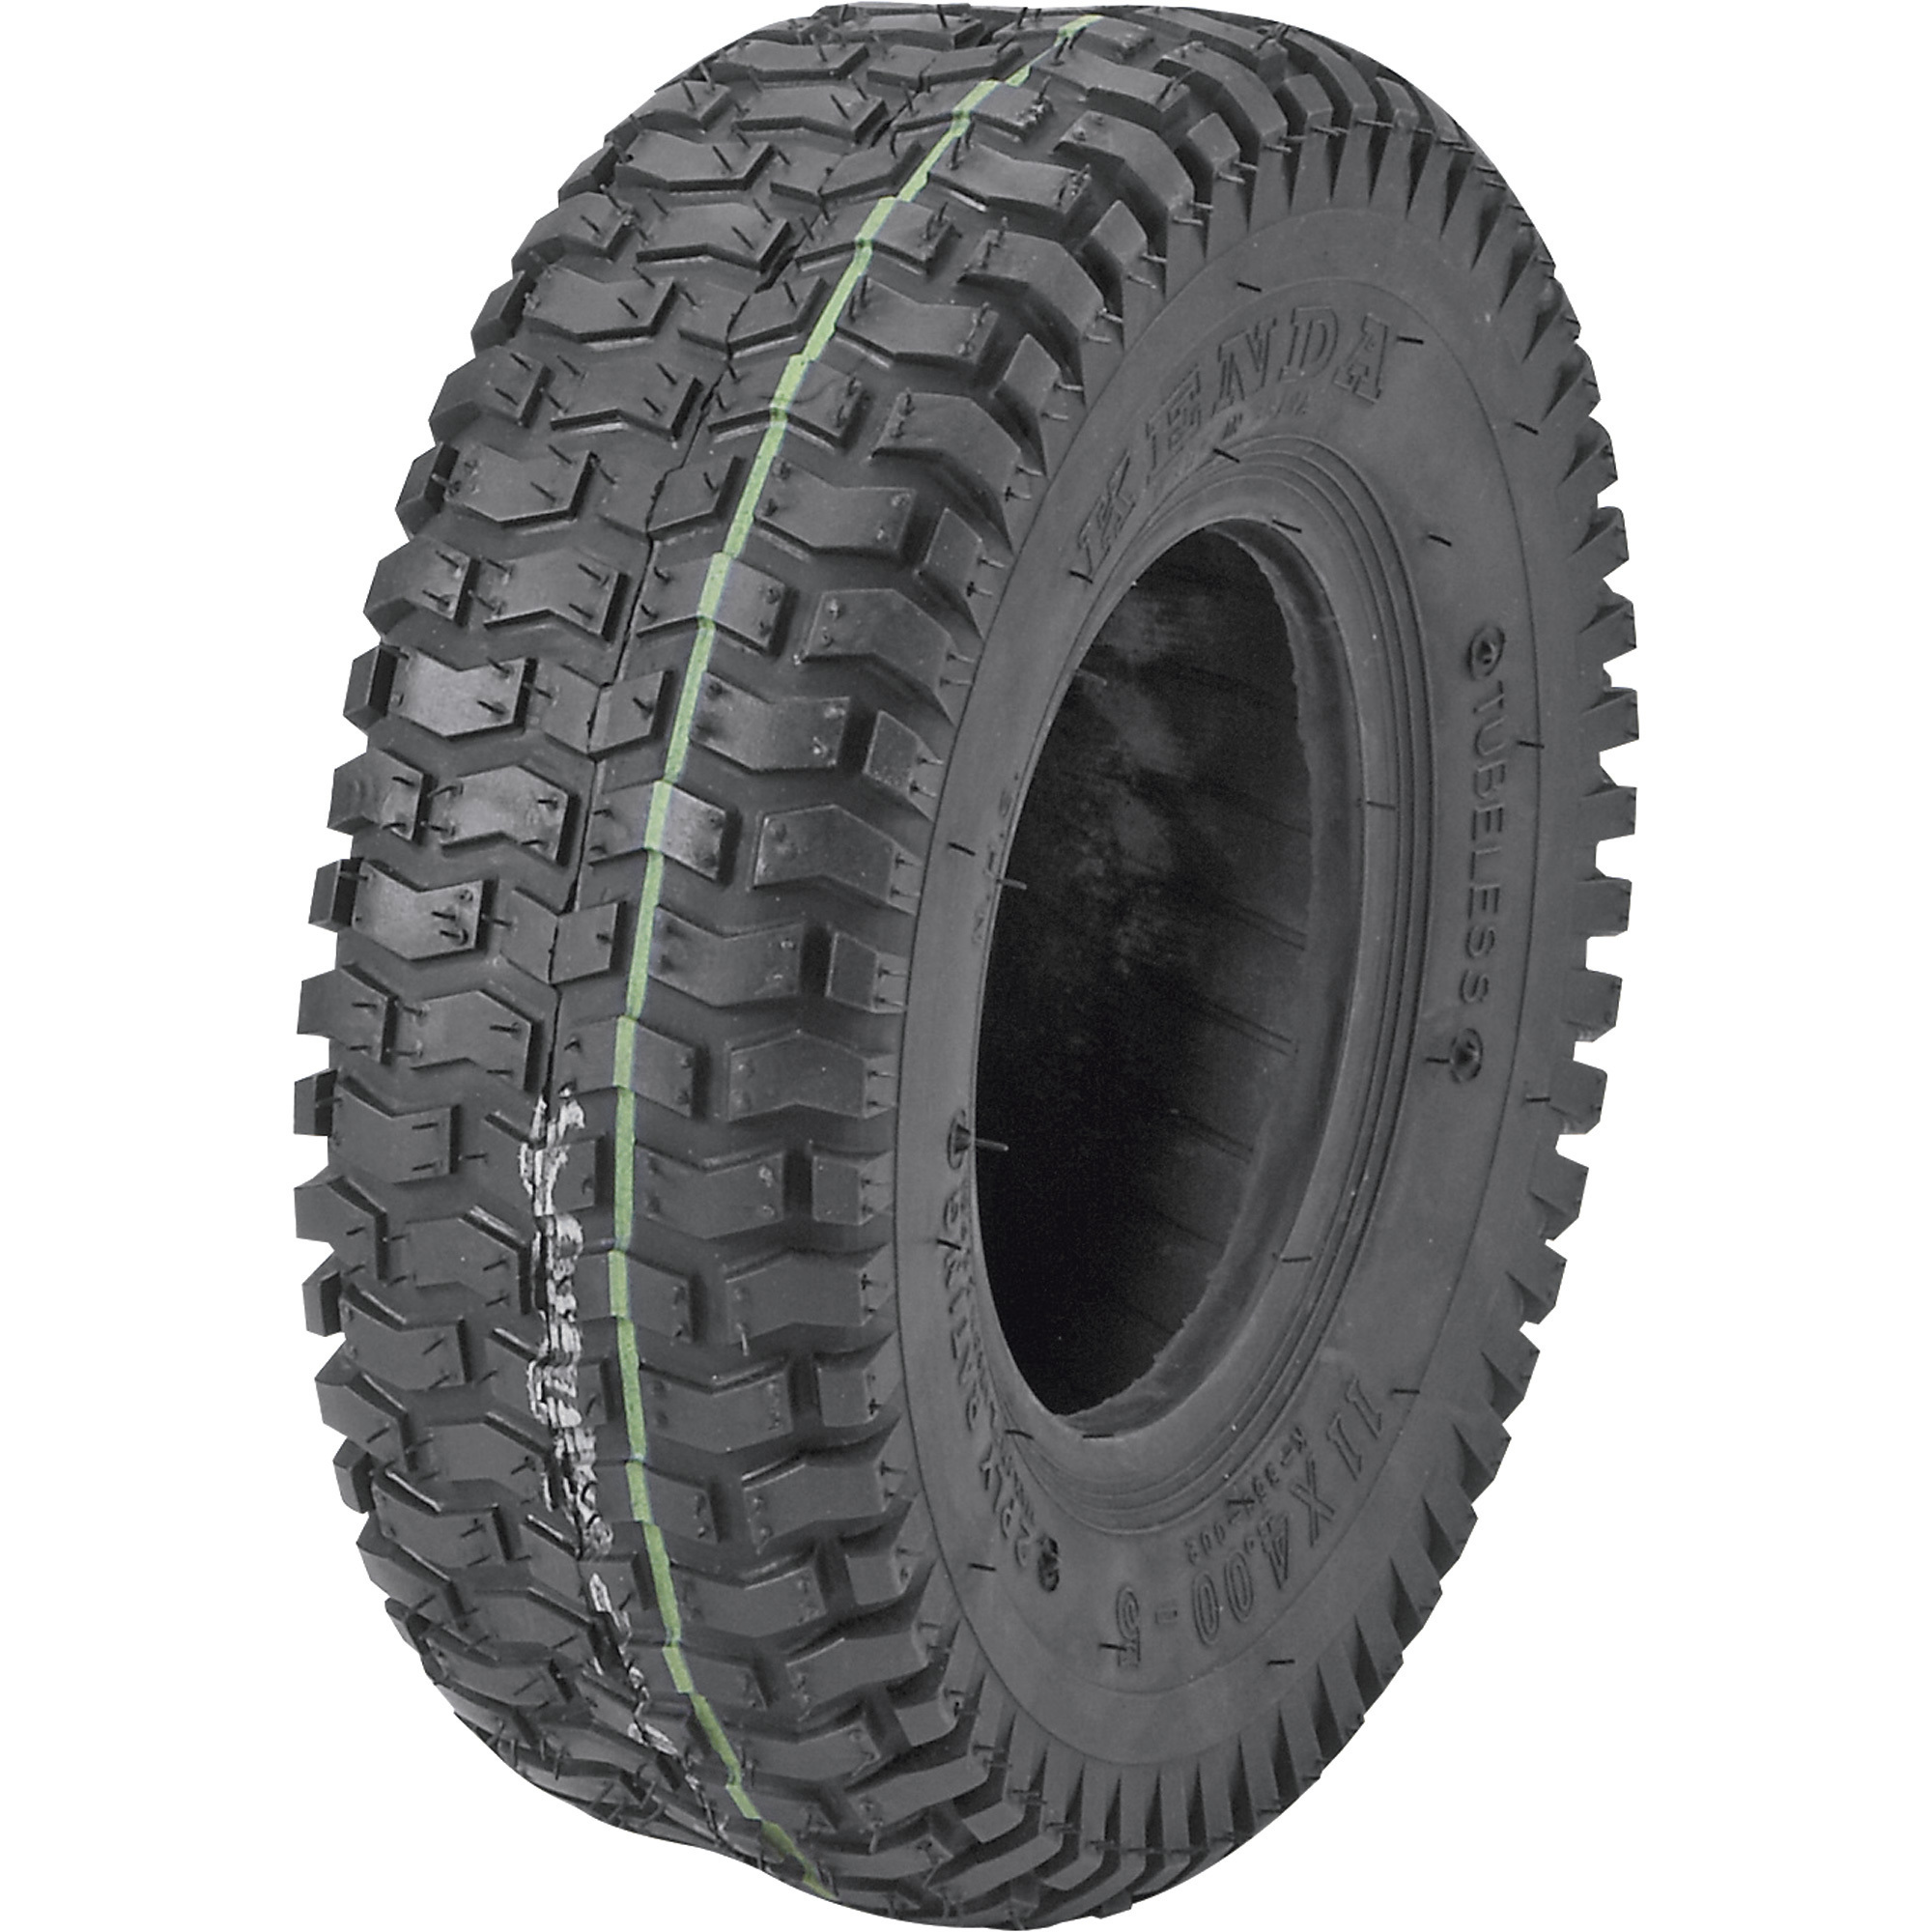 Lawn and Garden Tractor Tubeless Replacement Turf Tire â 20 x 10 x 8